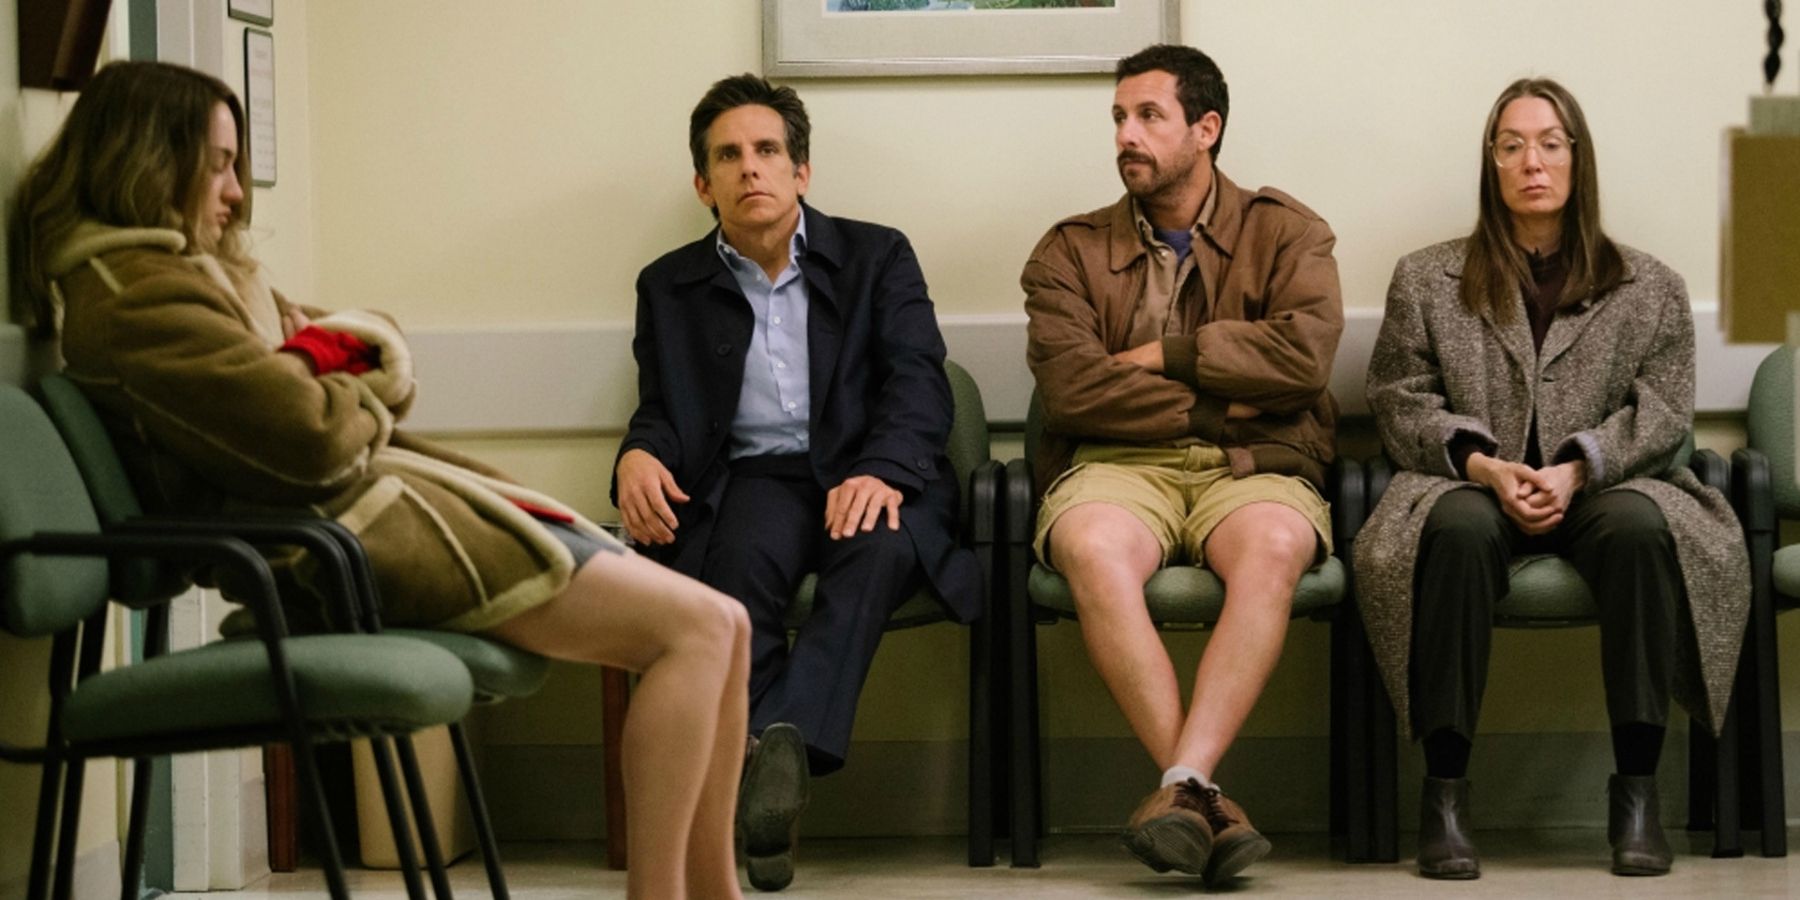 First Trailer for The Meyerowitz Stories Released